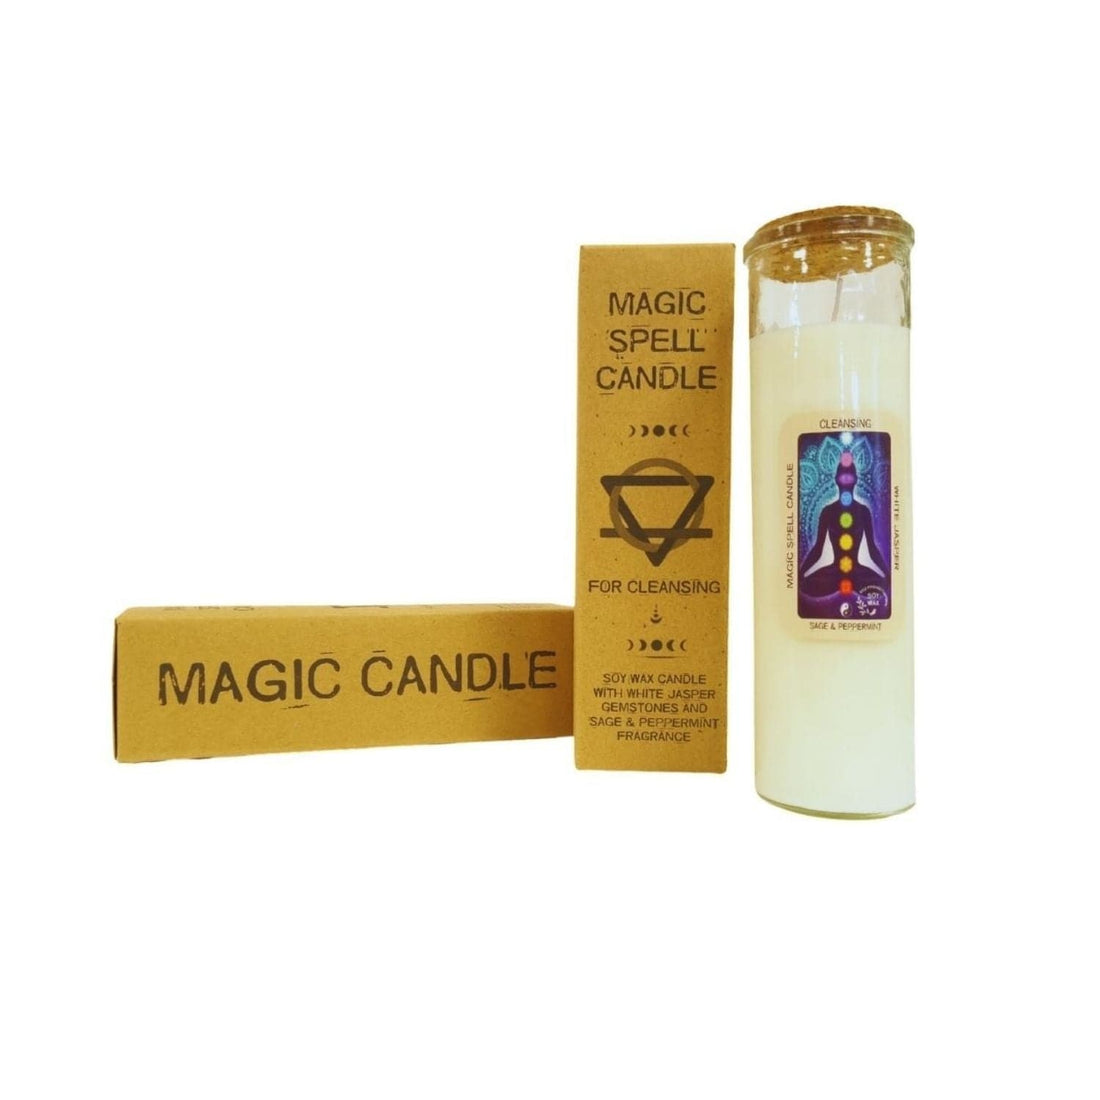 Magic Spell Candle - Cleansing - best price from Maltashopper.com MSC-02